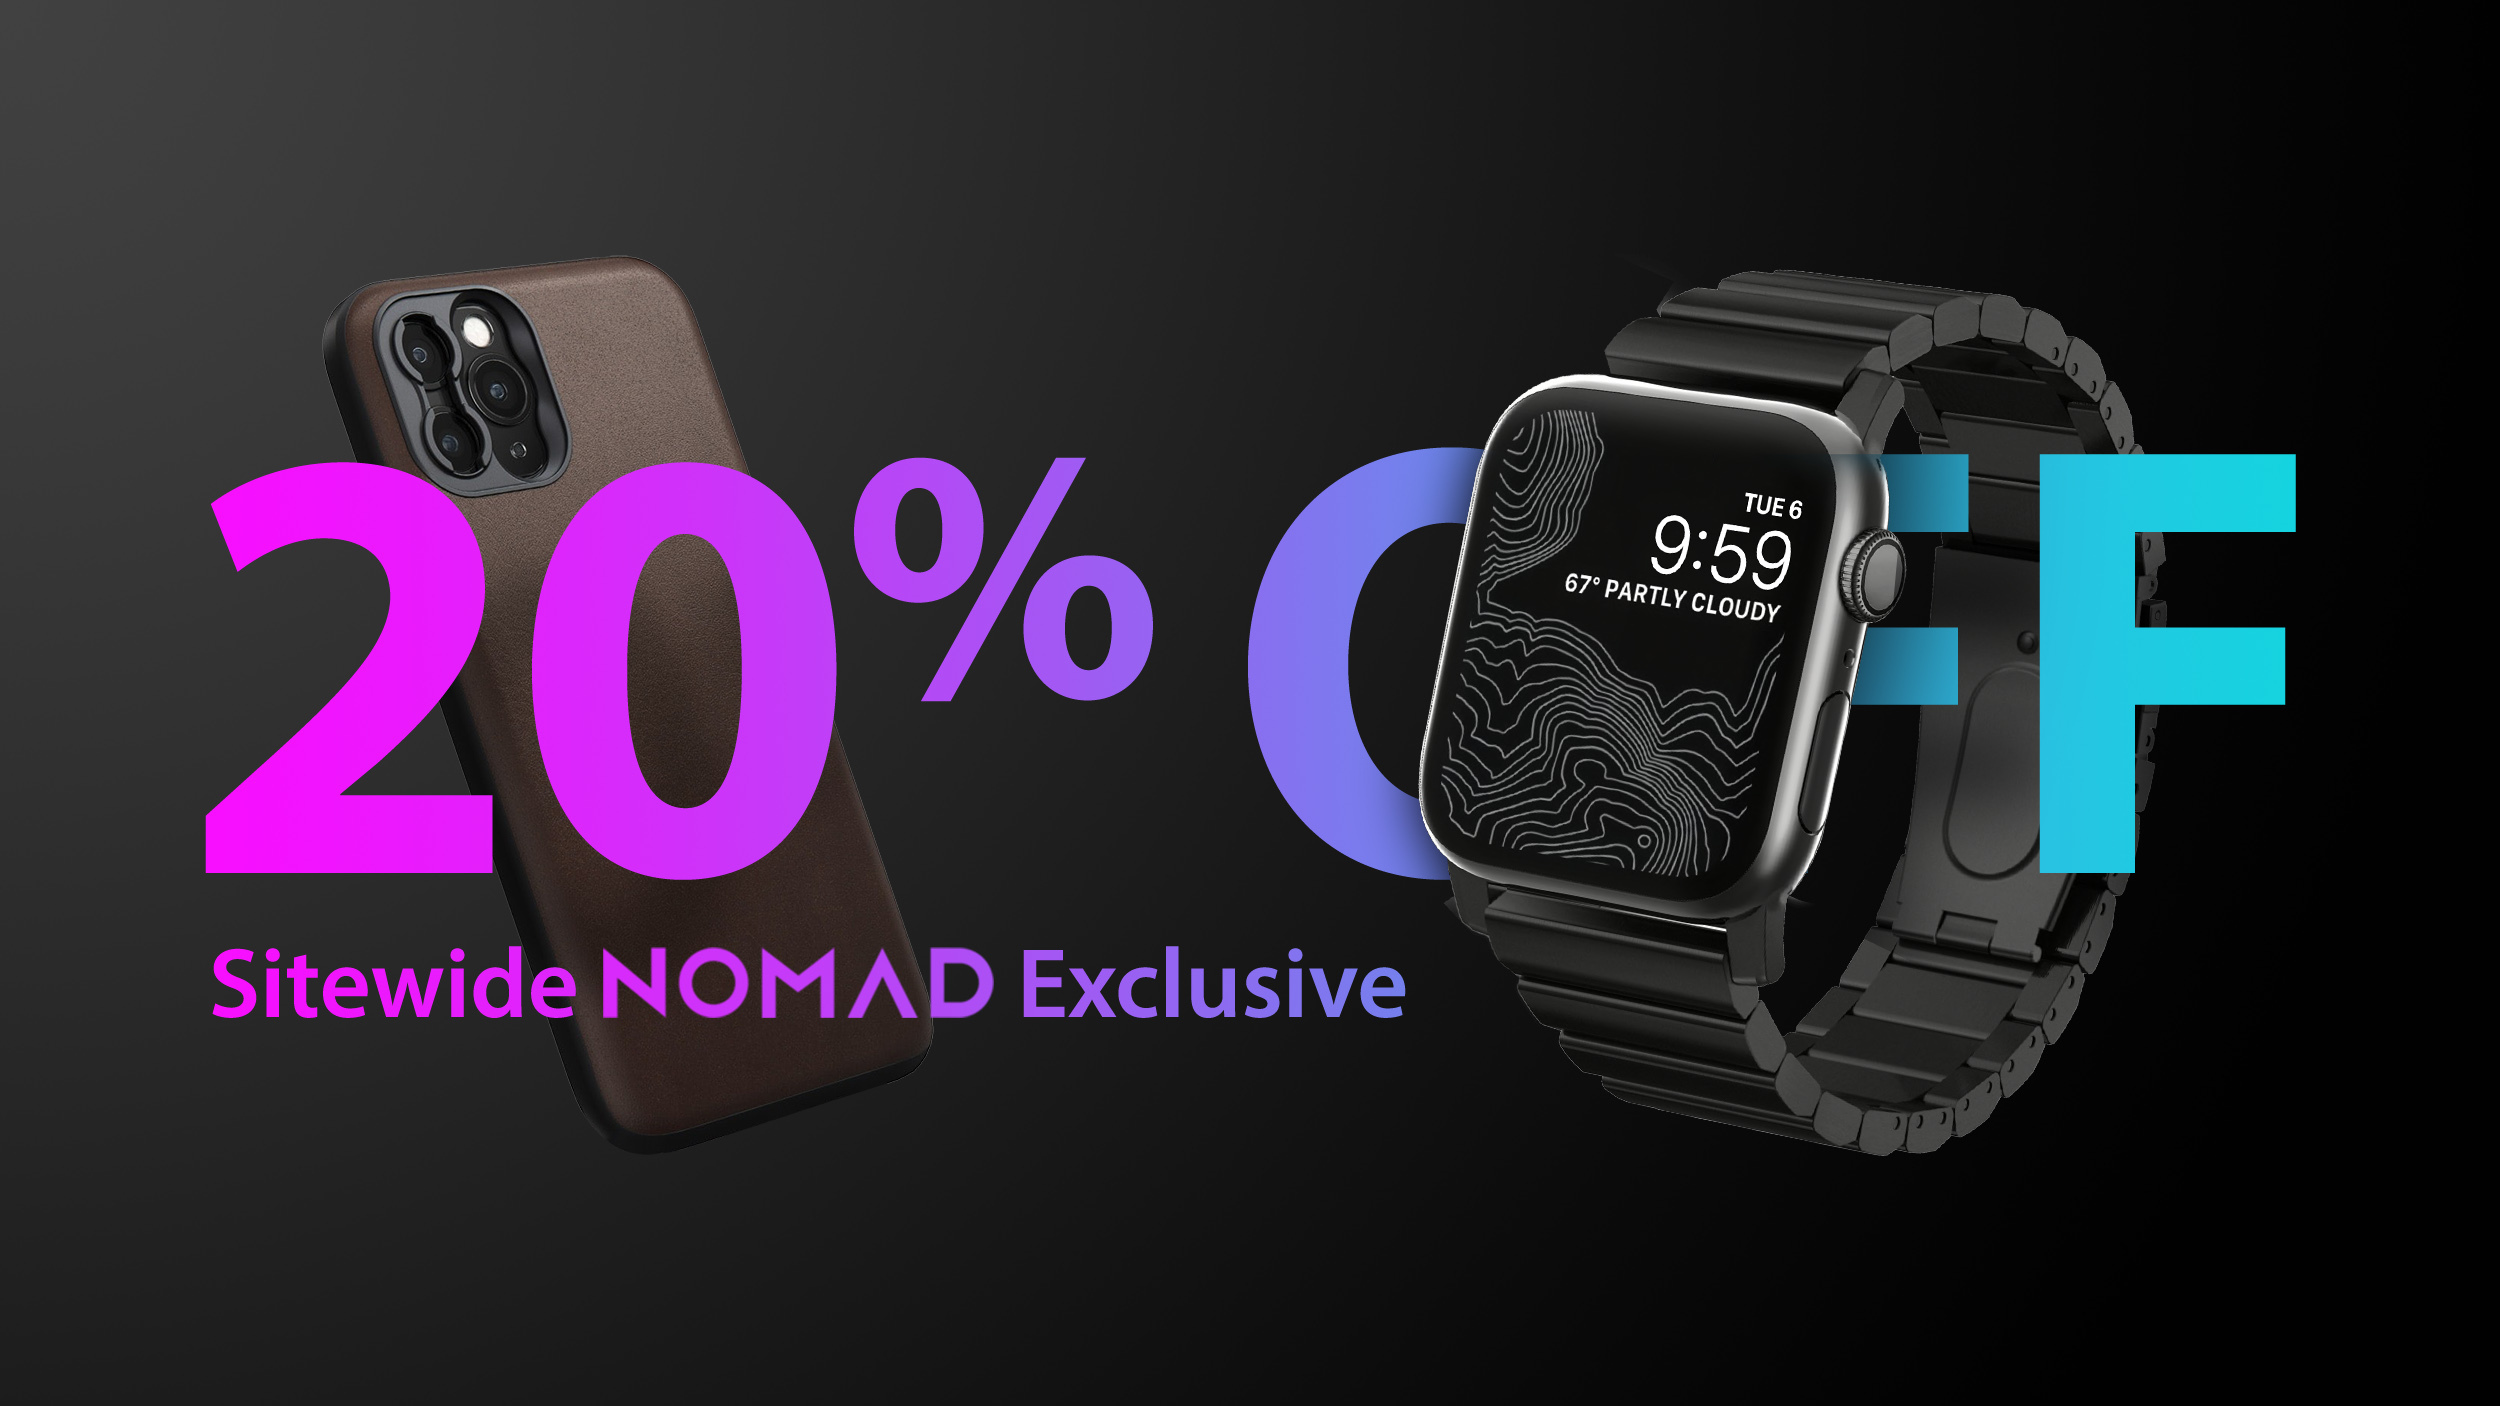 MacRumors Exclusive: Nomad Offering 20% Off USB-C Cables, iPhone Cases, and More Sitewide